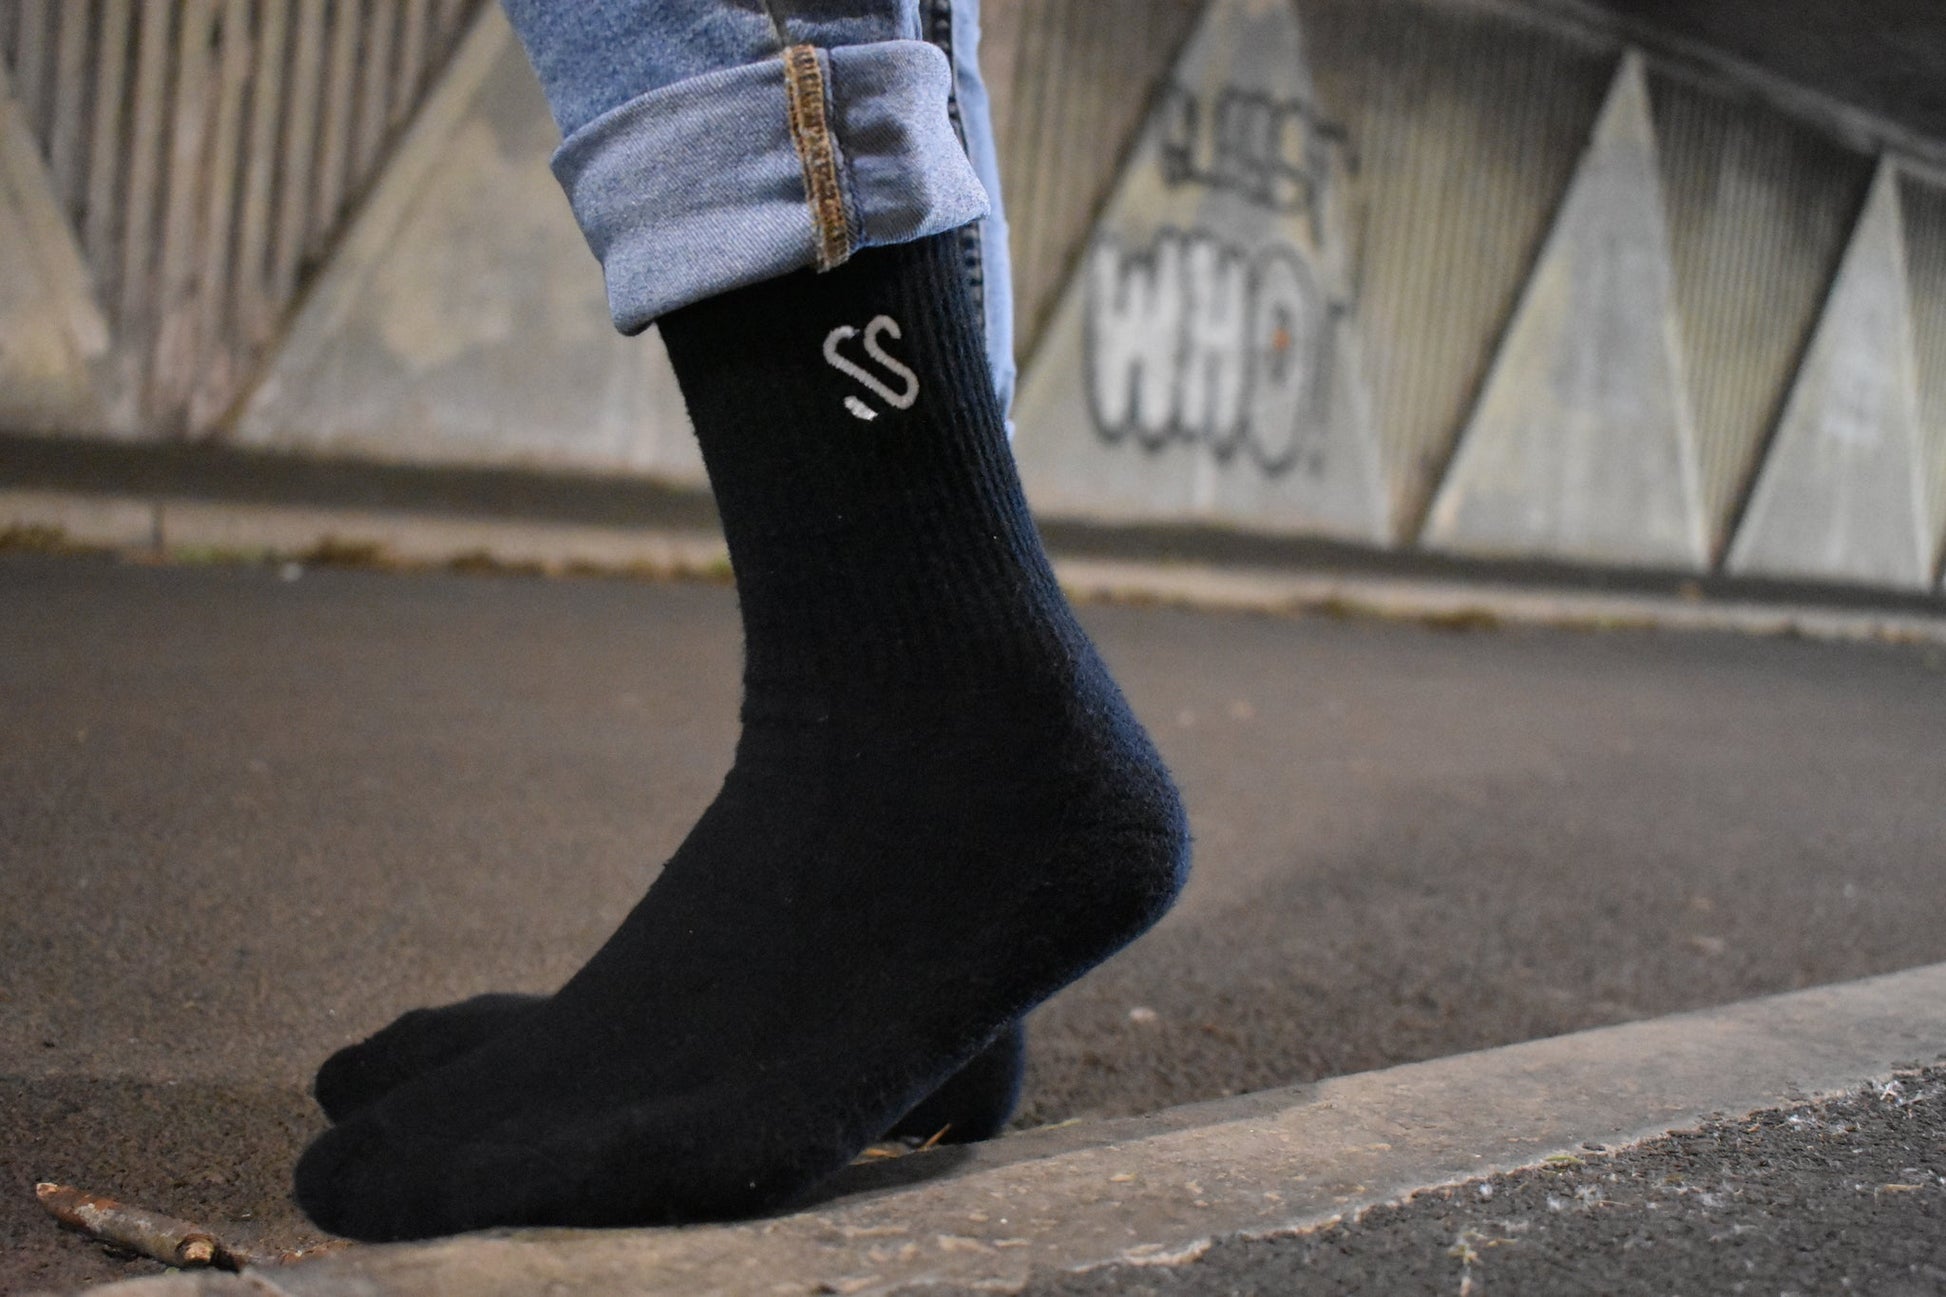 A pair of black crew length combed cotton socks being worn outside